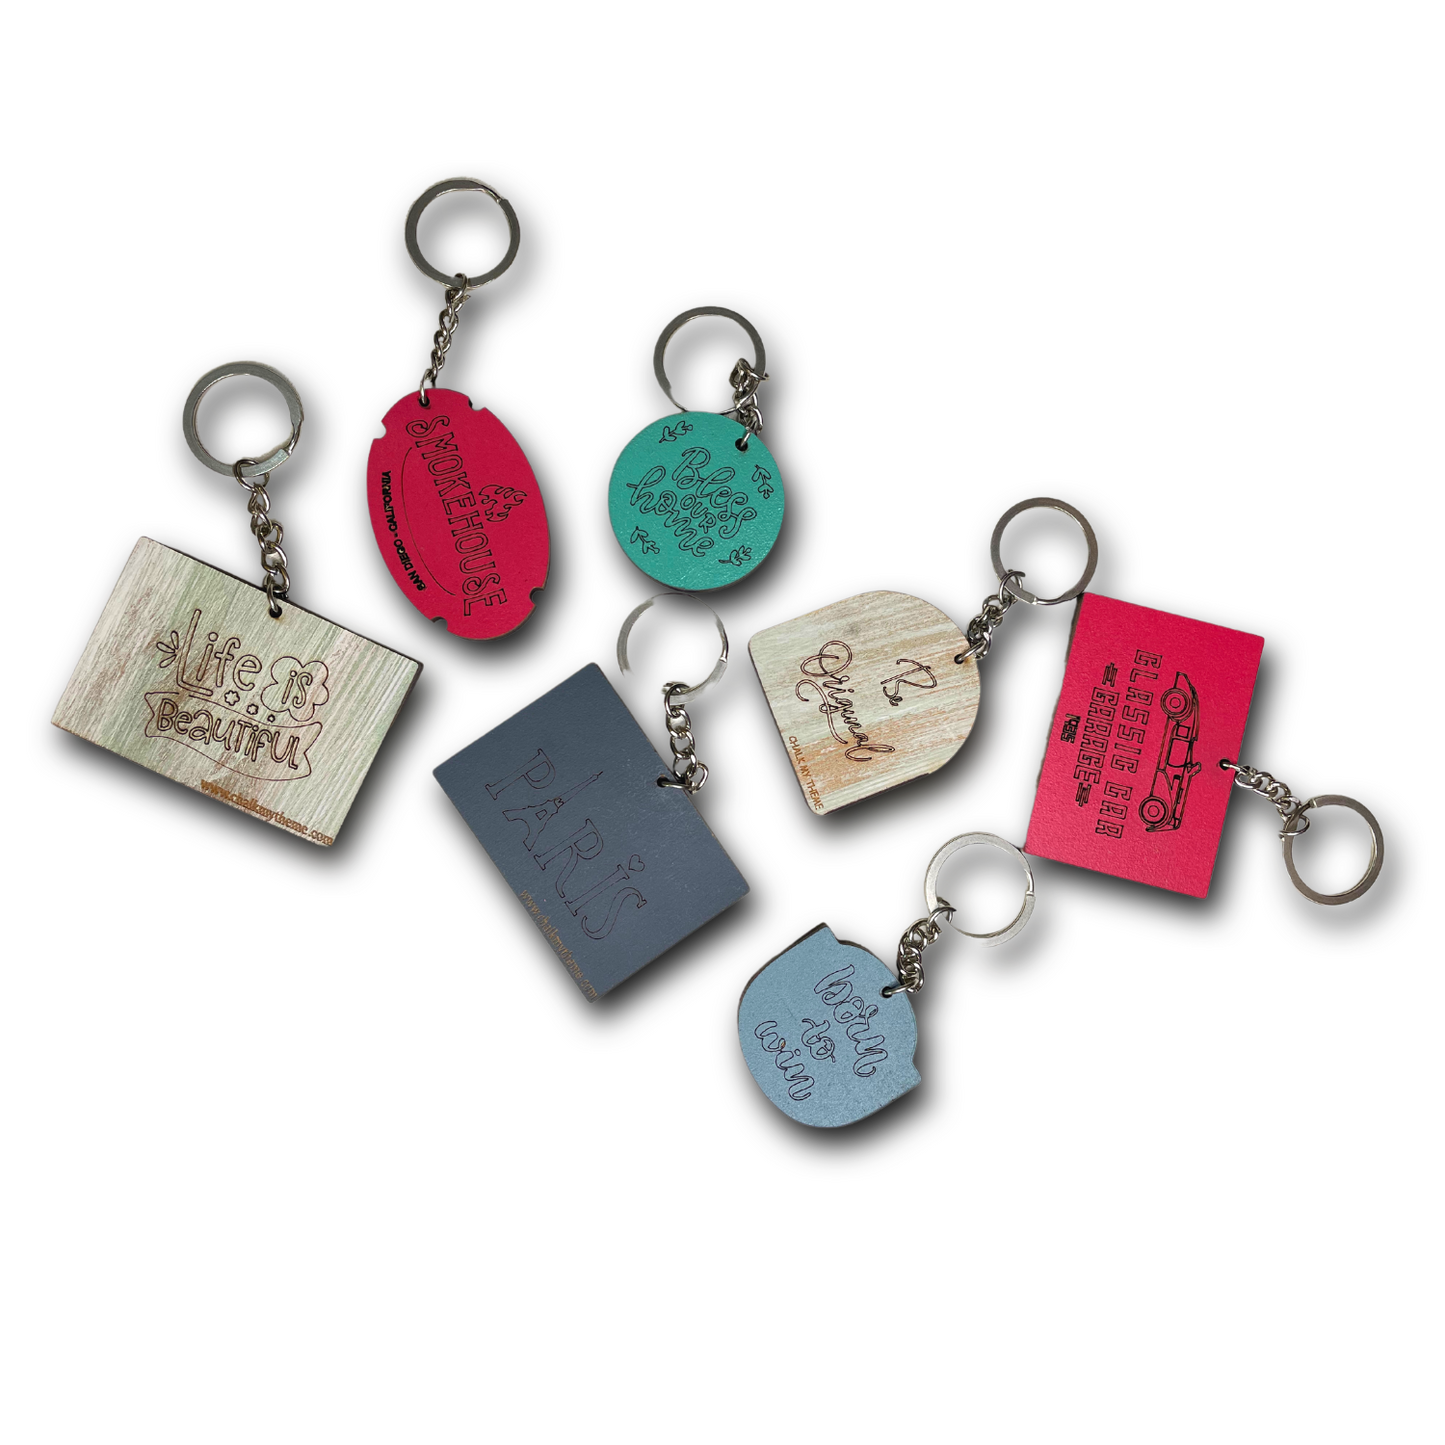 Motivational Quotes, Home, and Paris Word Engraved Wooden Keychains Pack of 6